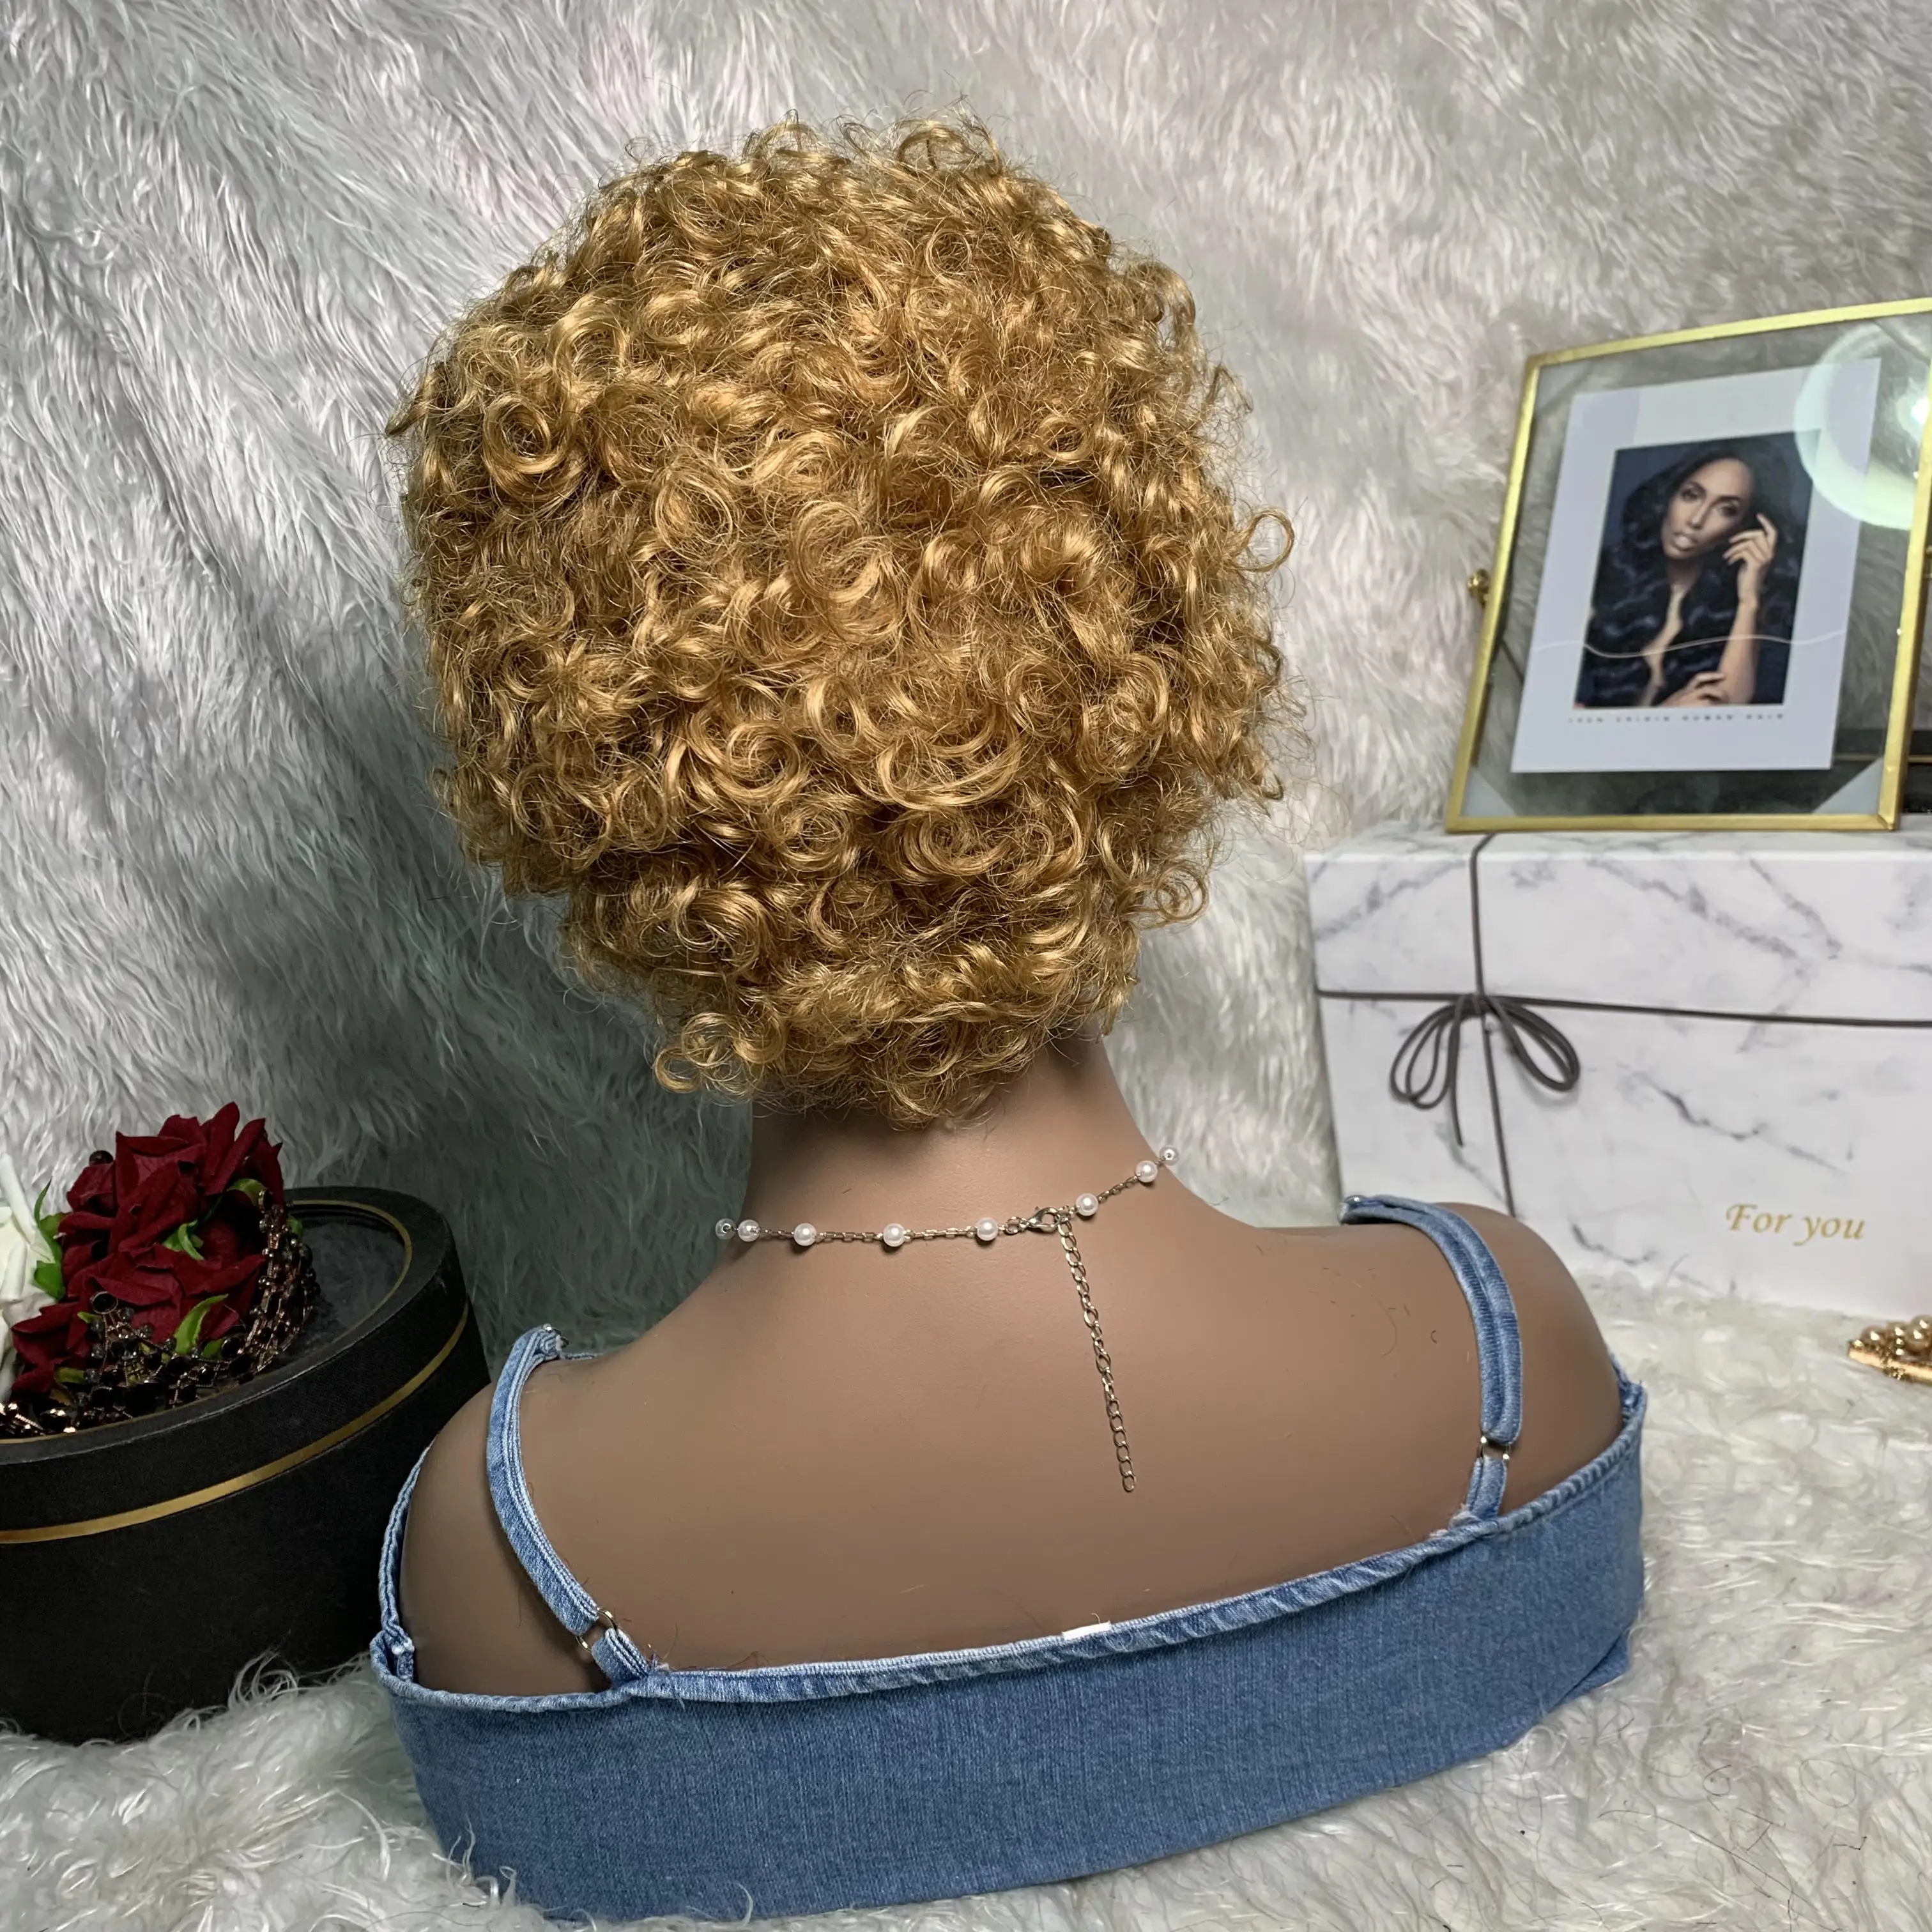 Short Curly Lace Front Wig Pixie Cut Human Hair Wig 150 Density Short Deep Wave Curl Wig for Black Women T Lace Pre Plucked Wigs enlarge